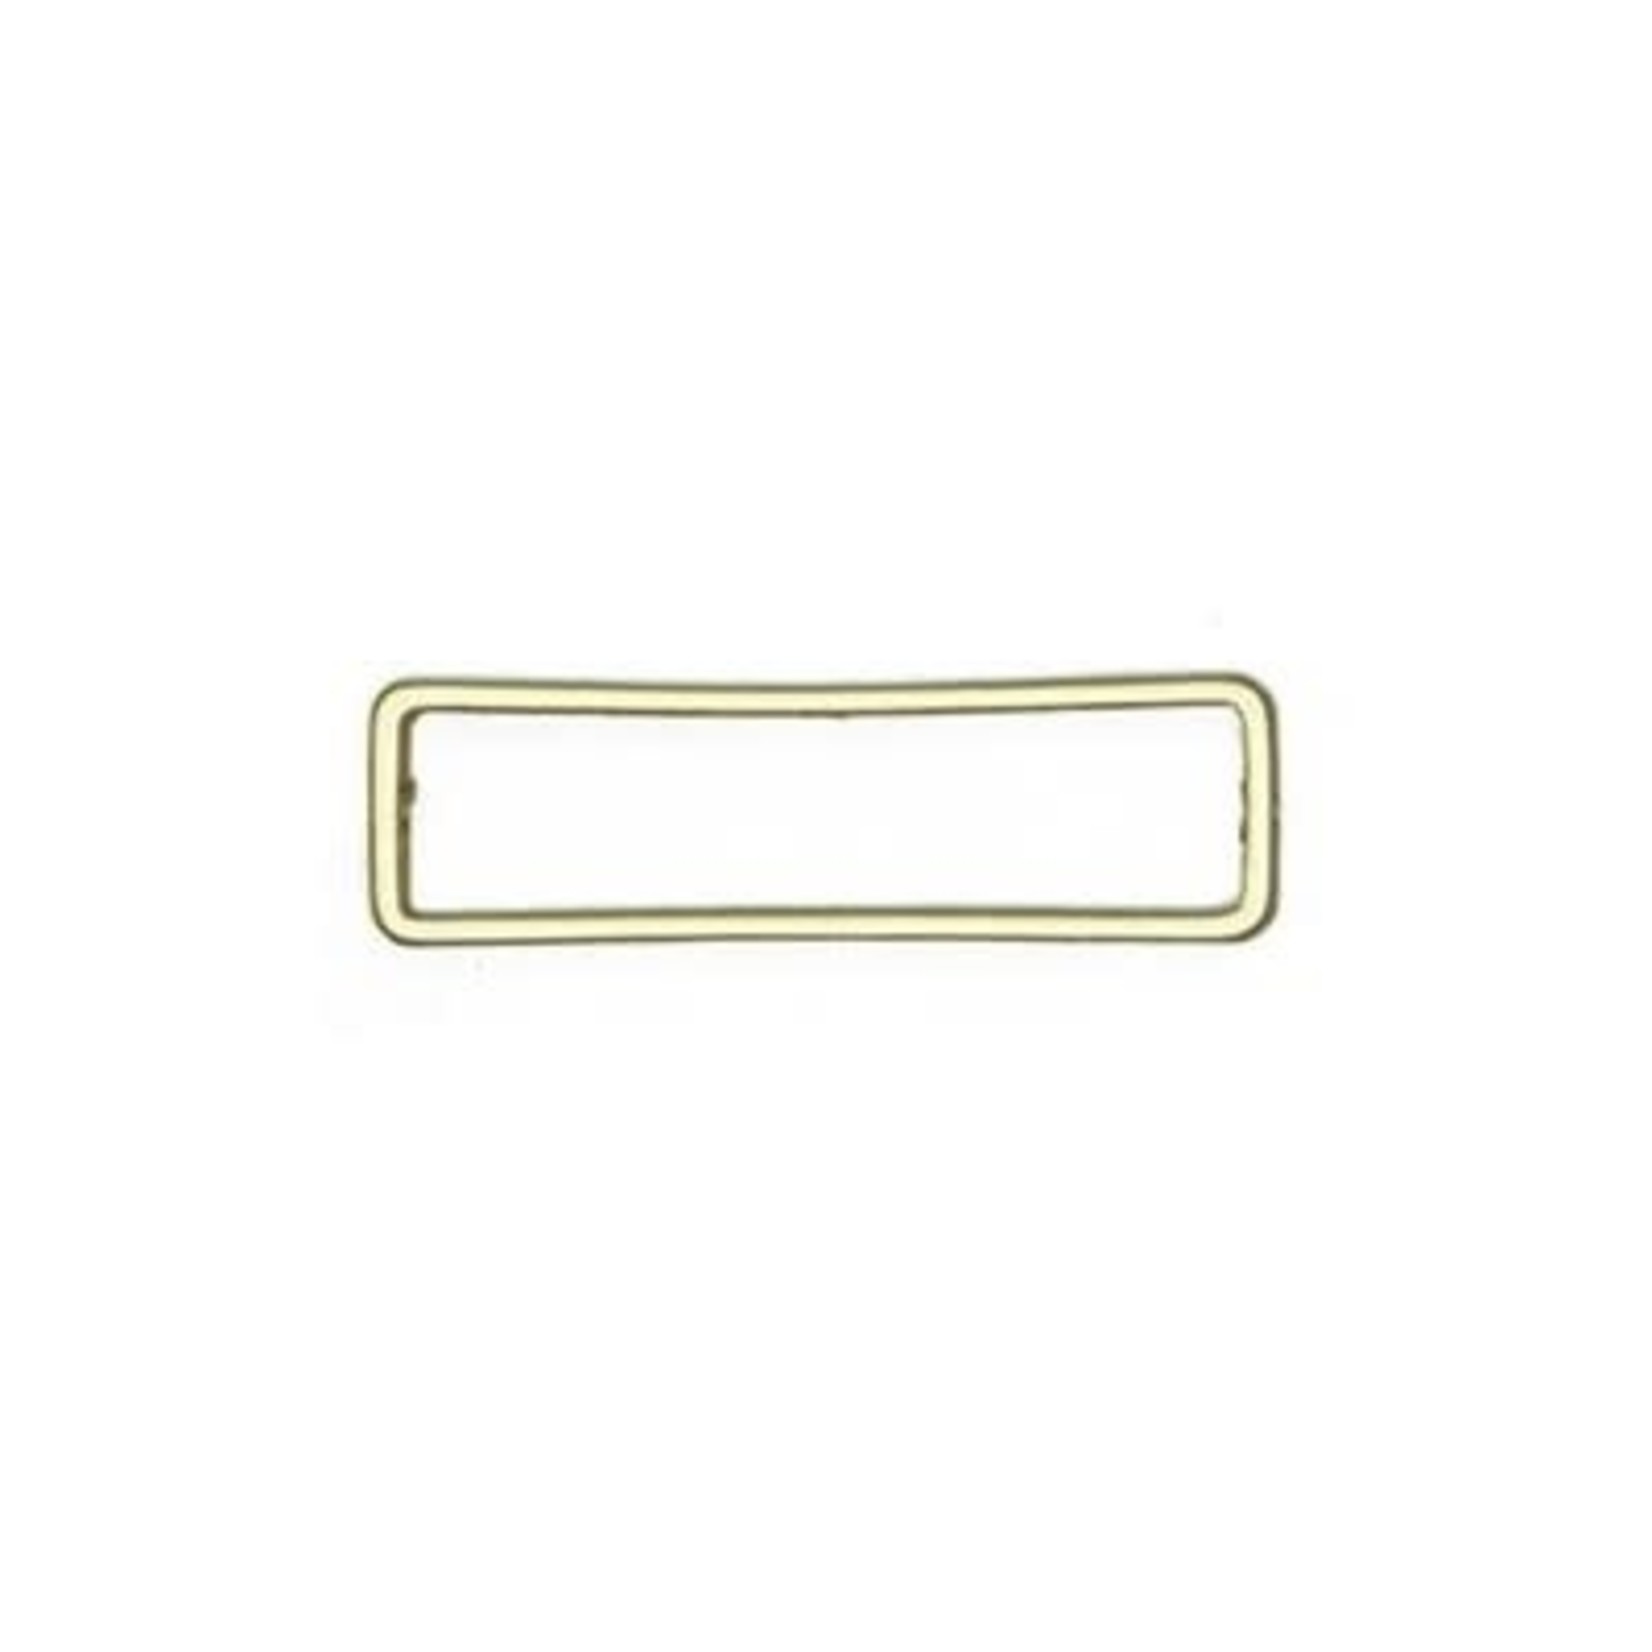 Satin Gold Plated Rectangle Bead Frame 25mm x 8mm Nickel-Free